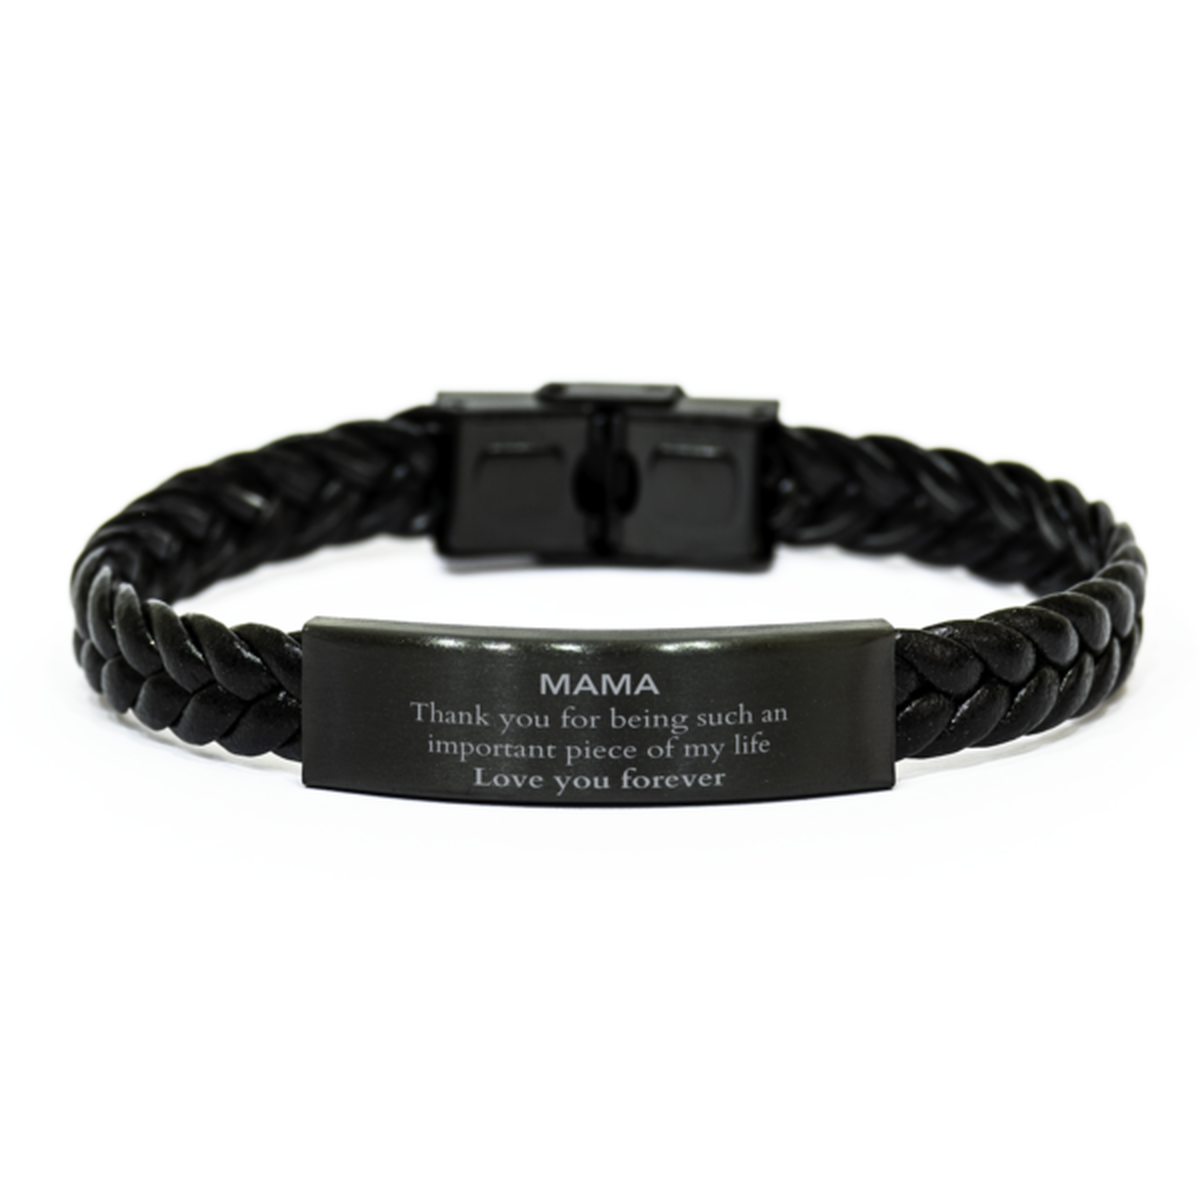 Appropriate Mama Braided Leather Bracelet Epic Birthday Gifts for Mama Thank you for being such an important piece of my life Mama Christmas Mothers Fathers Day